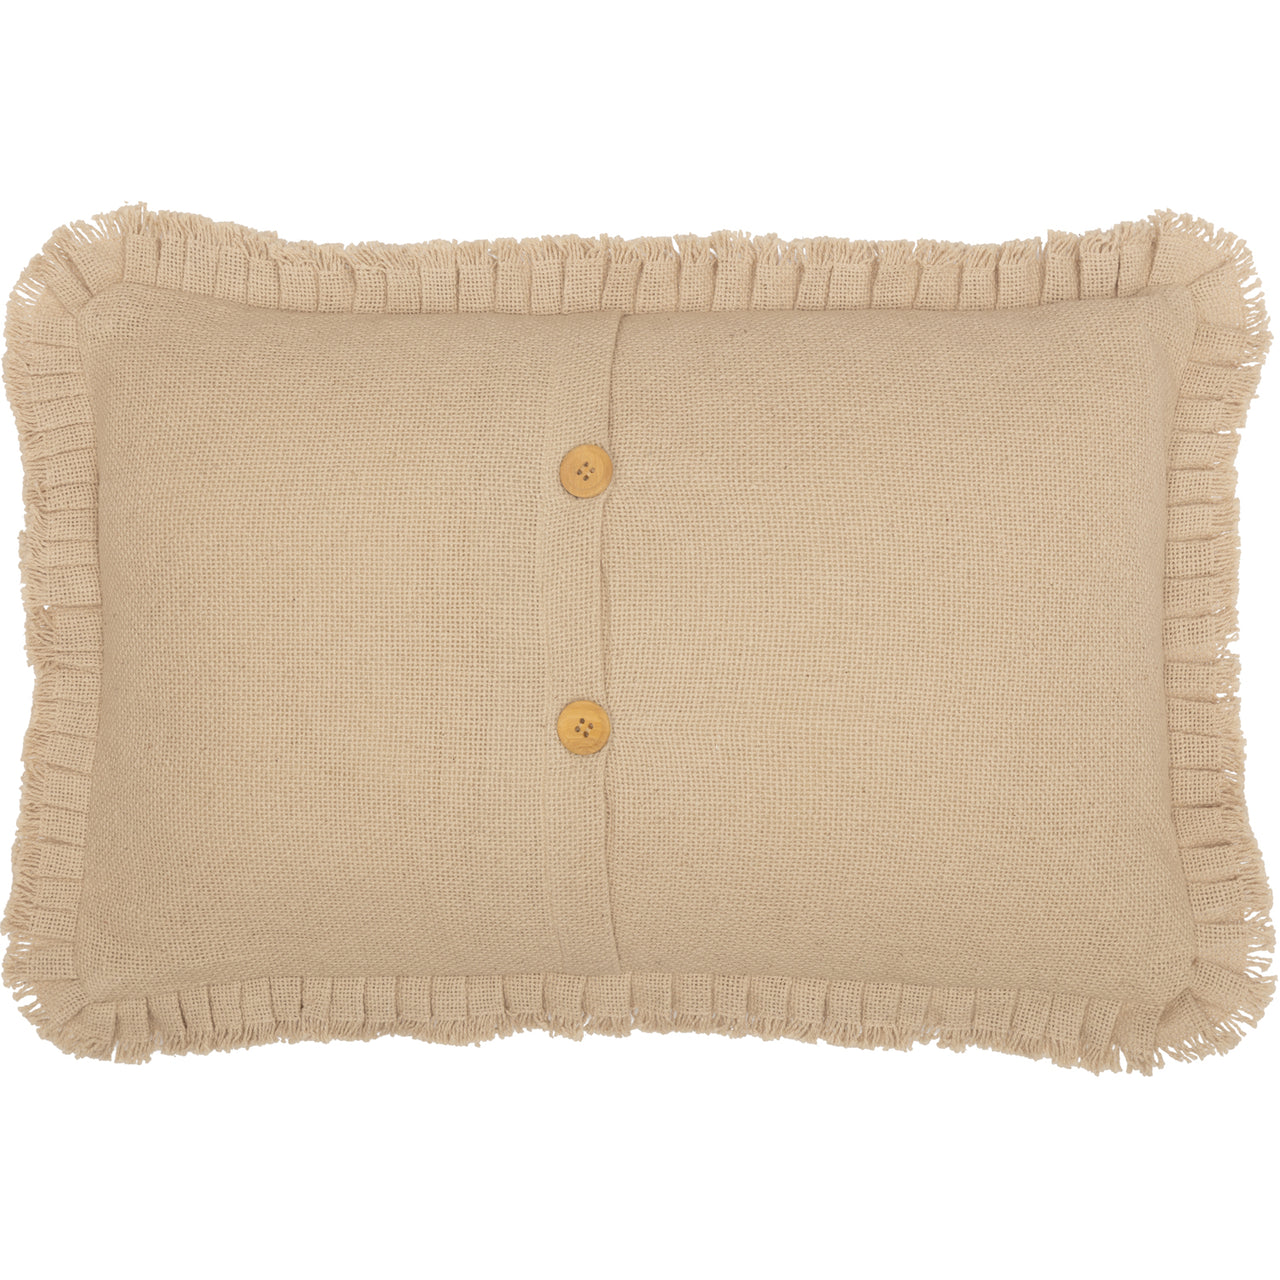 Burlap Vintage Pillow w/ Fringed Ruffle 14x22 VHC Brands